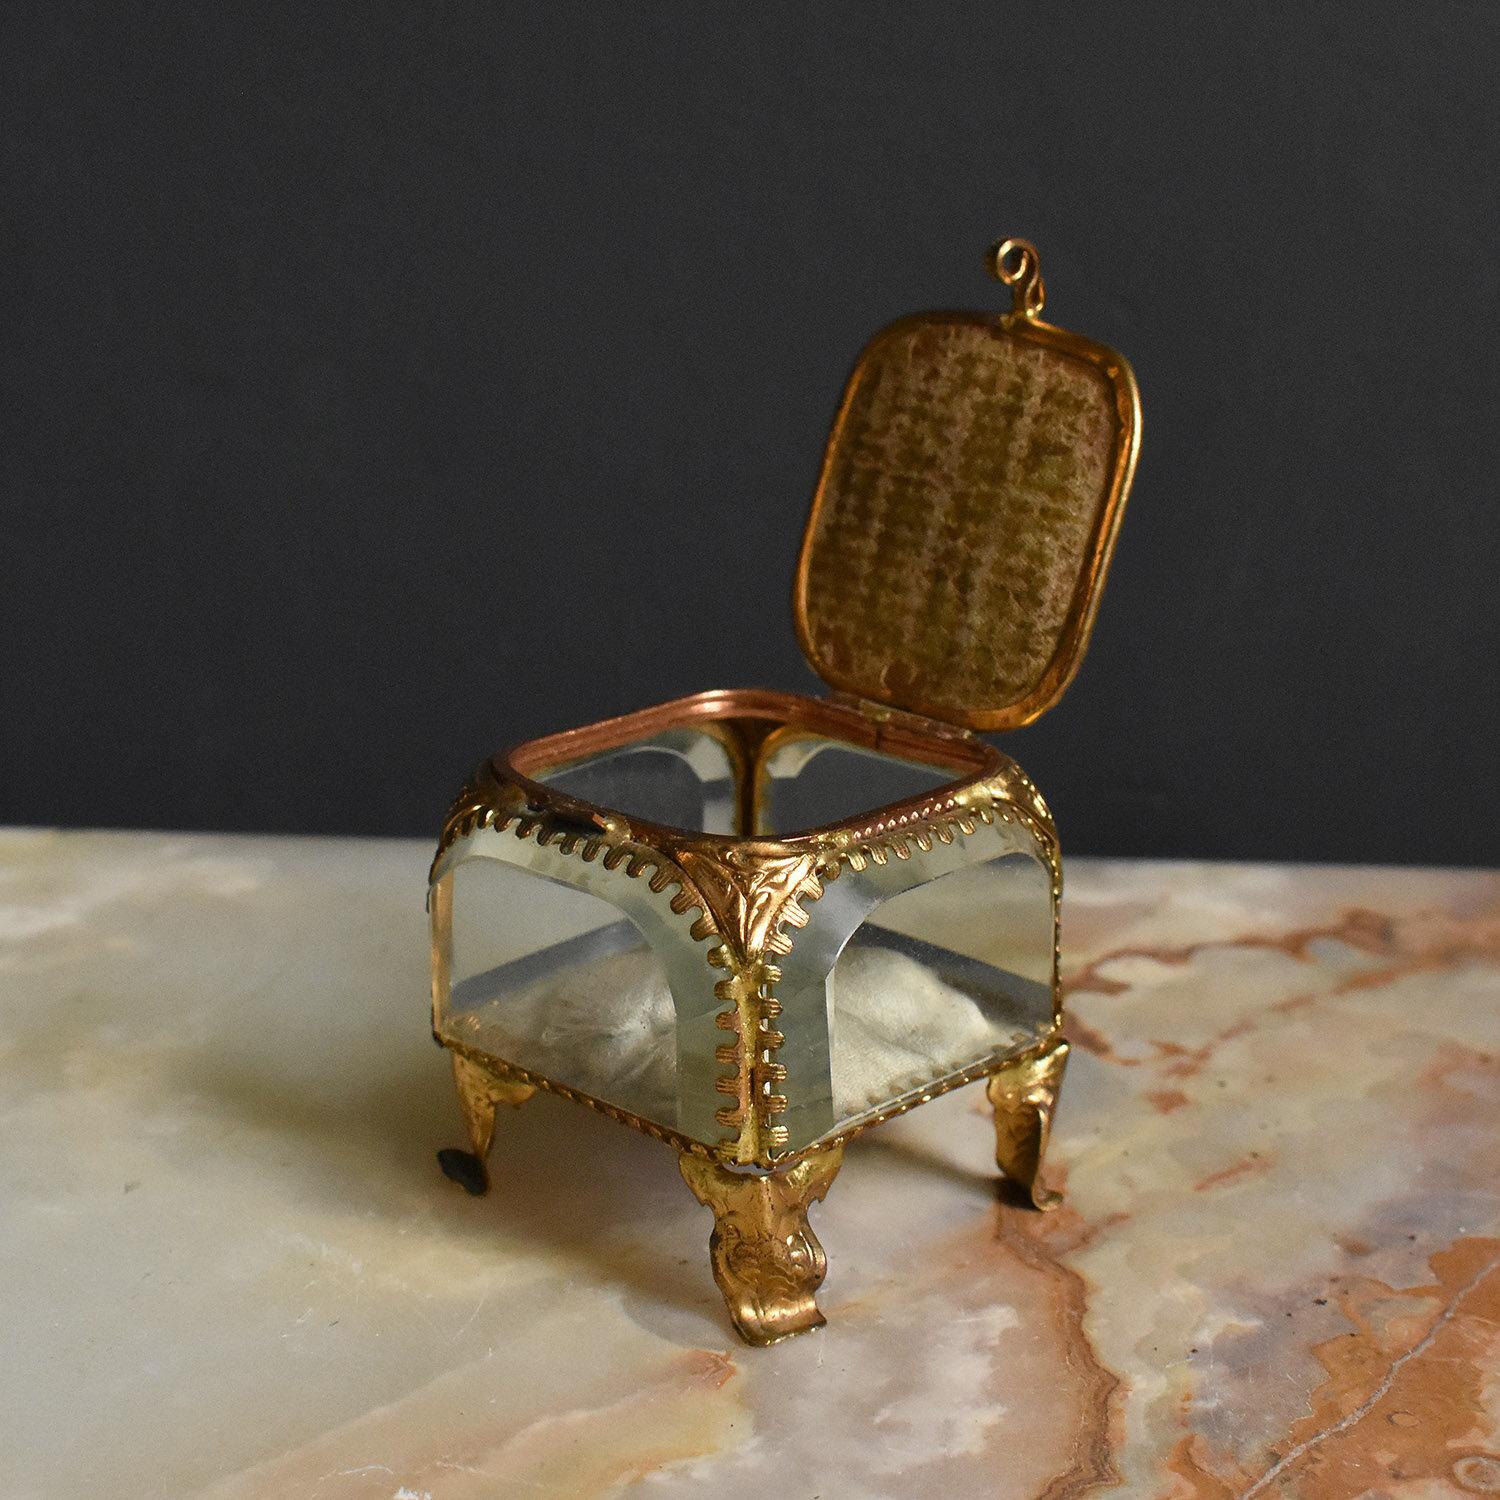 Antique French Gilt Brass and Cut Glass Souvenir Jewellery Casket, 19th Century For Sale 5